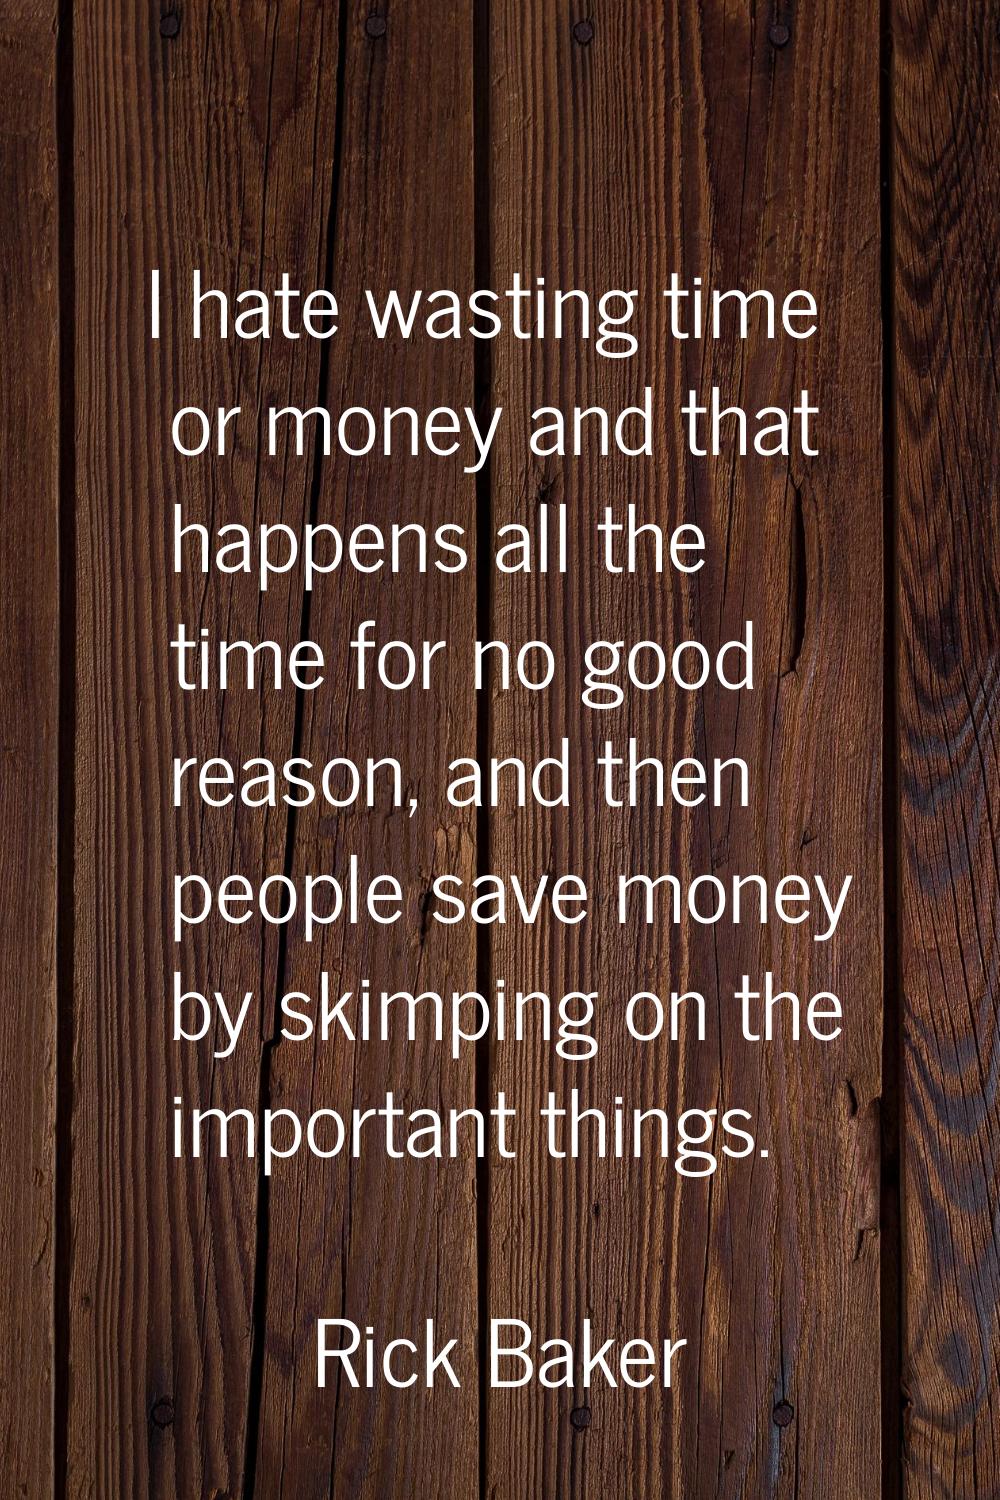 I hate wasting time or money and that happens all the time for no good reason, and then people save